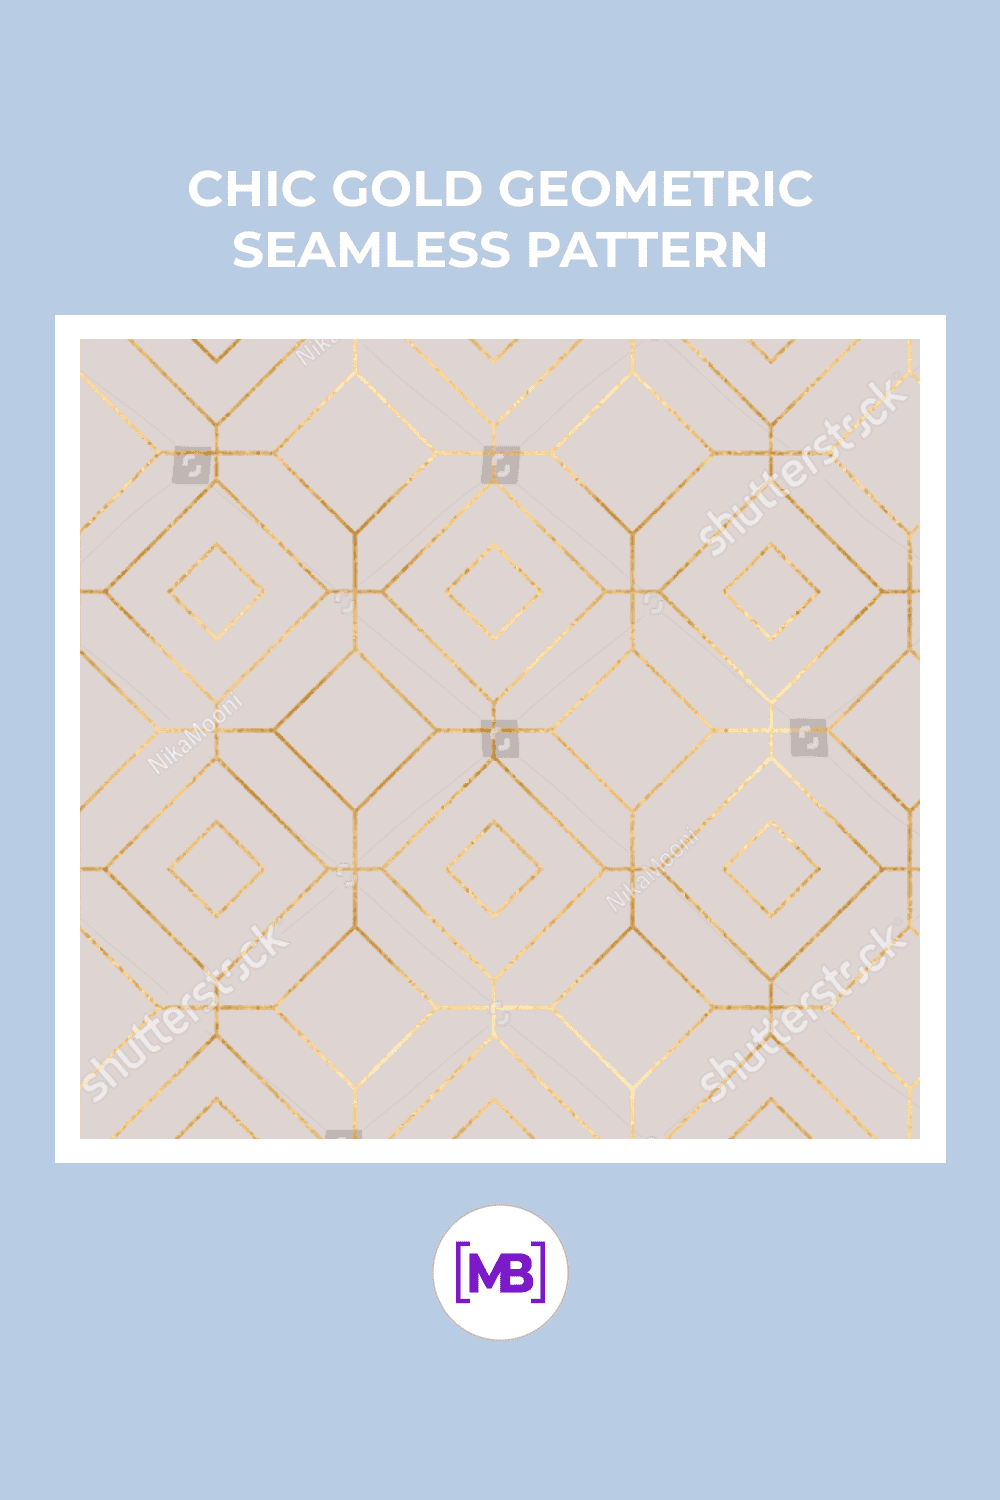 Geometric shapes with a gold rim on a beige background.